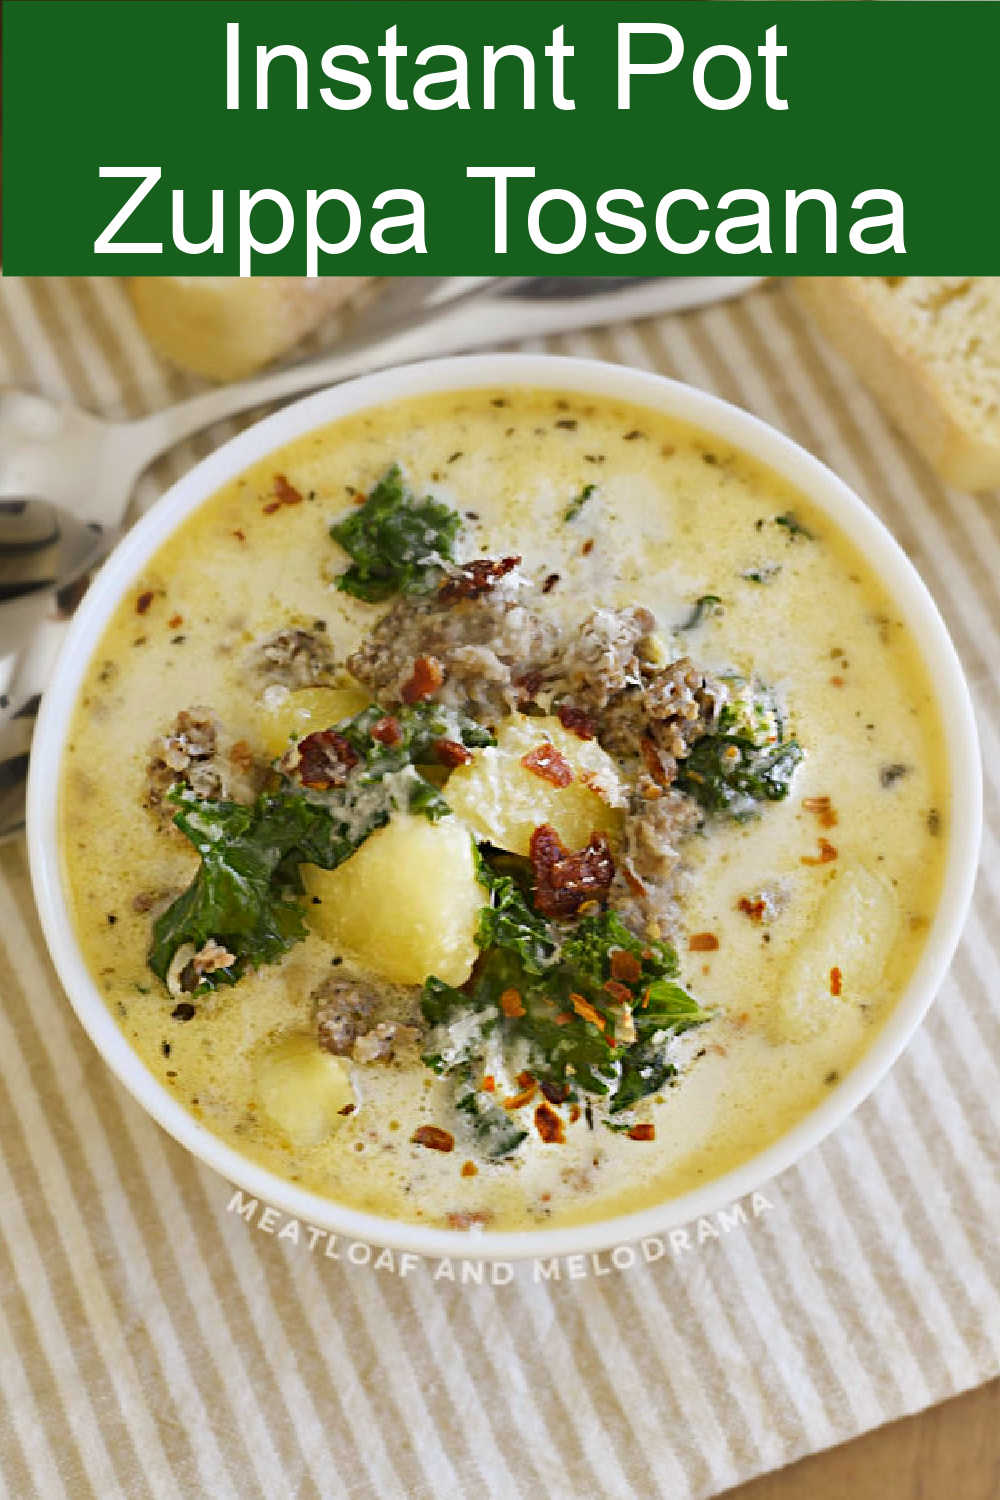 Instant Pot Zuppa Toscana Soup - Meatloaf and Melodrama